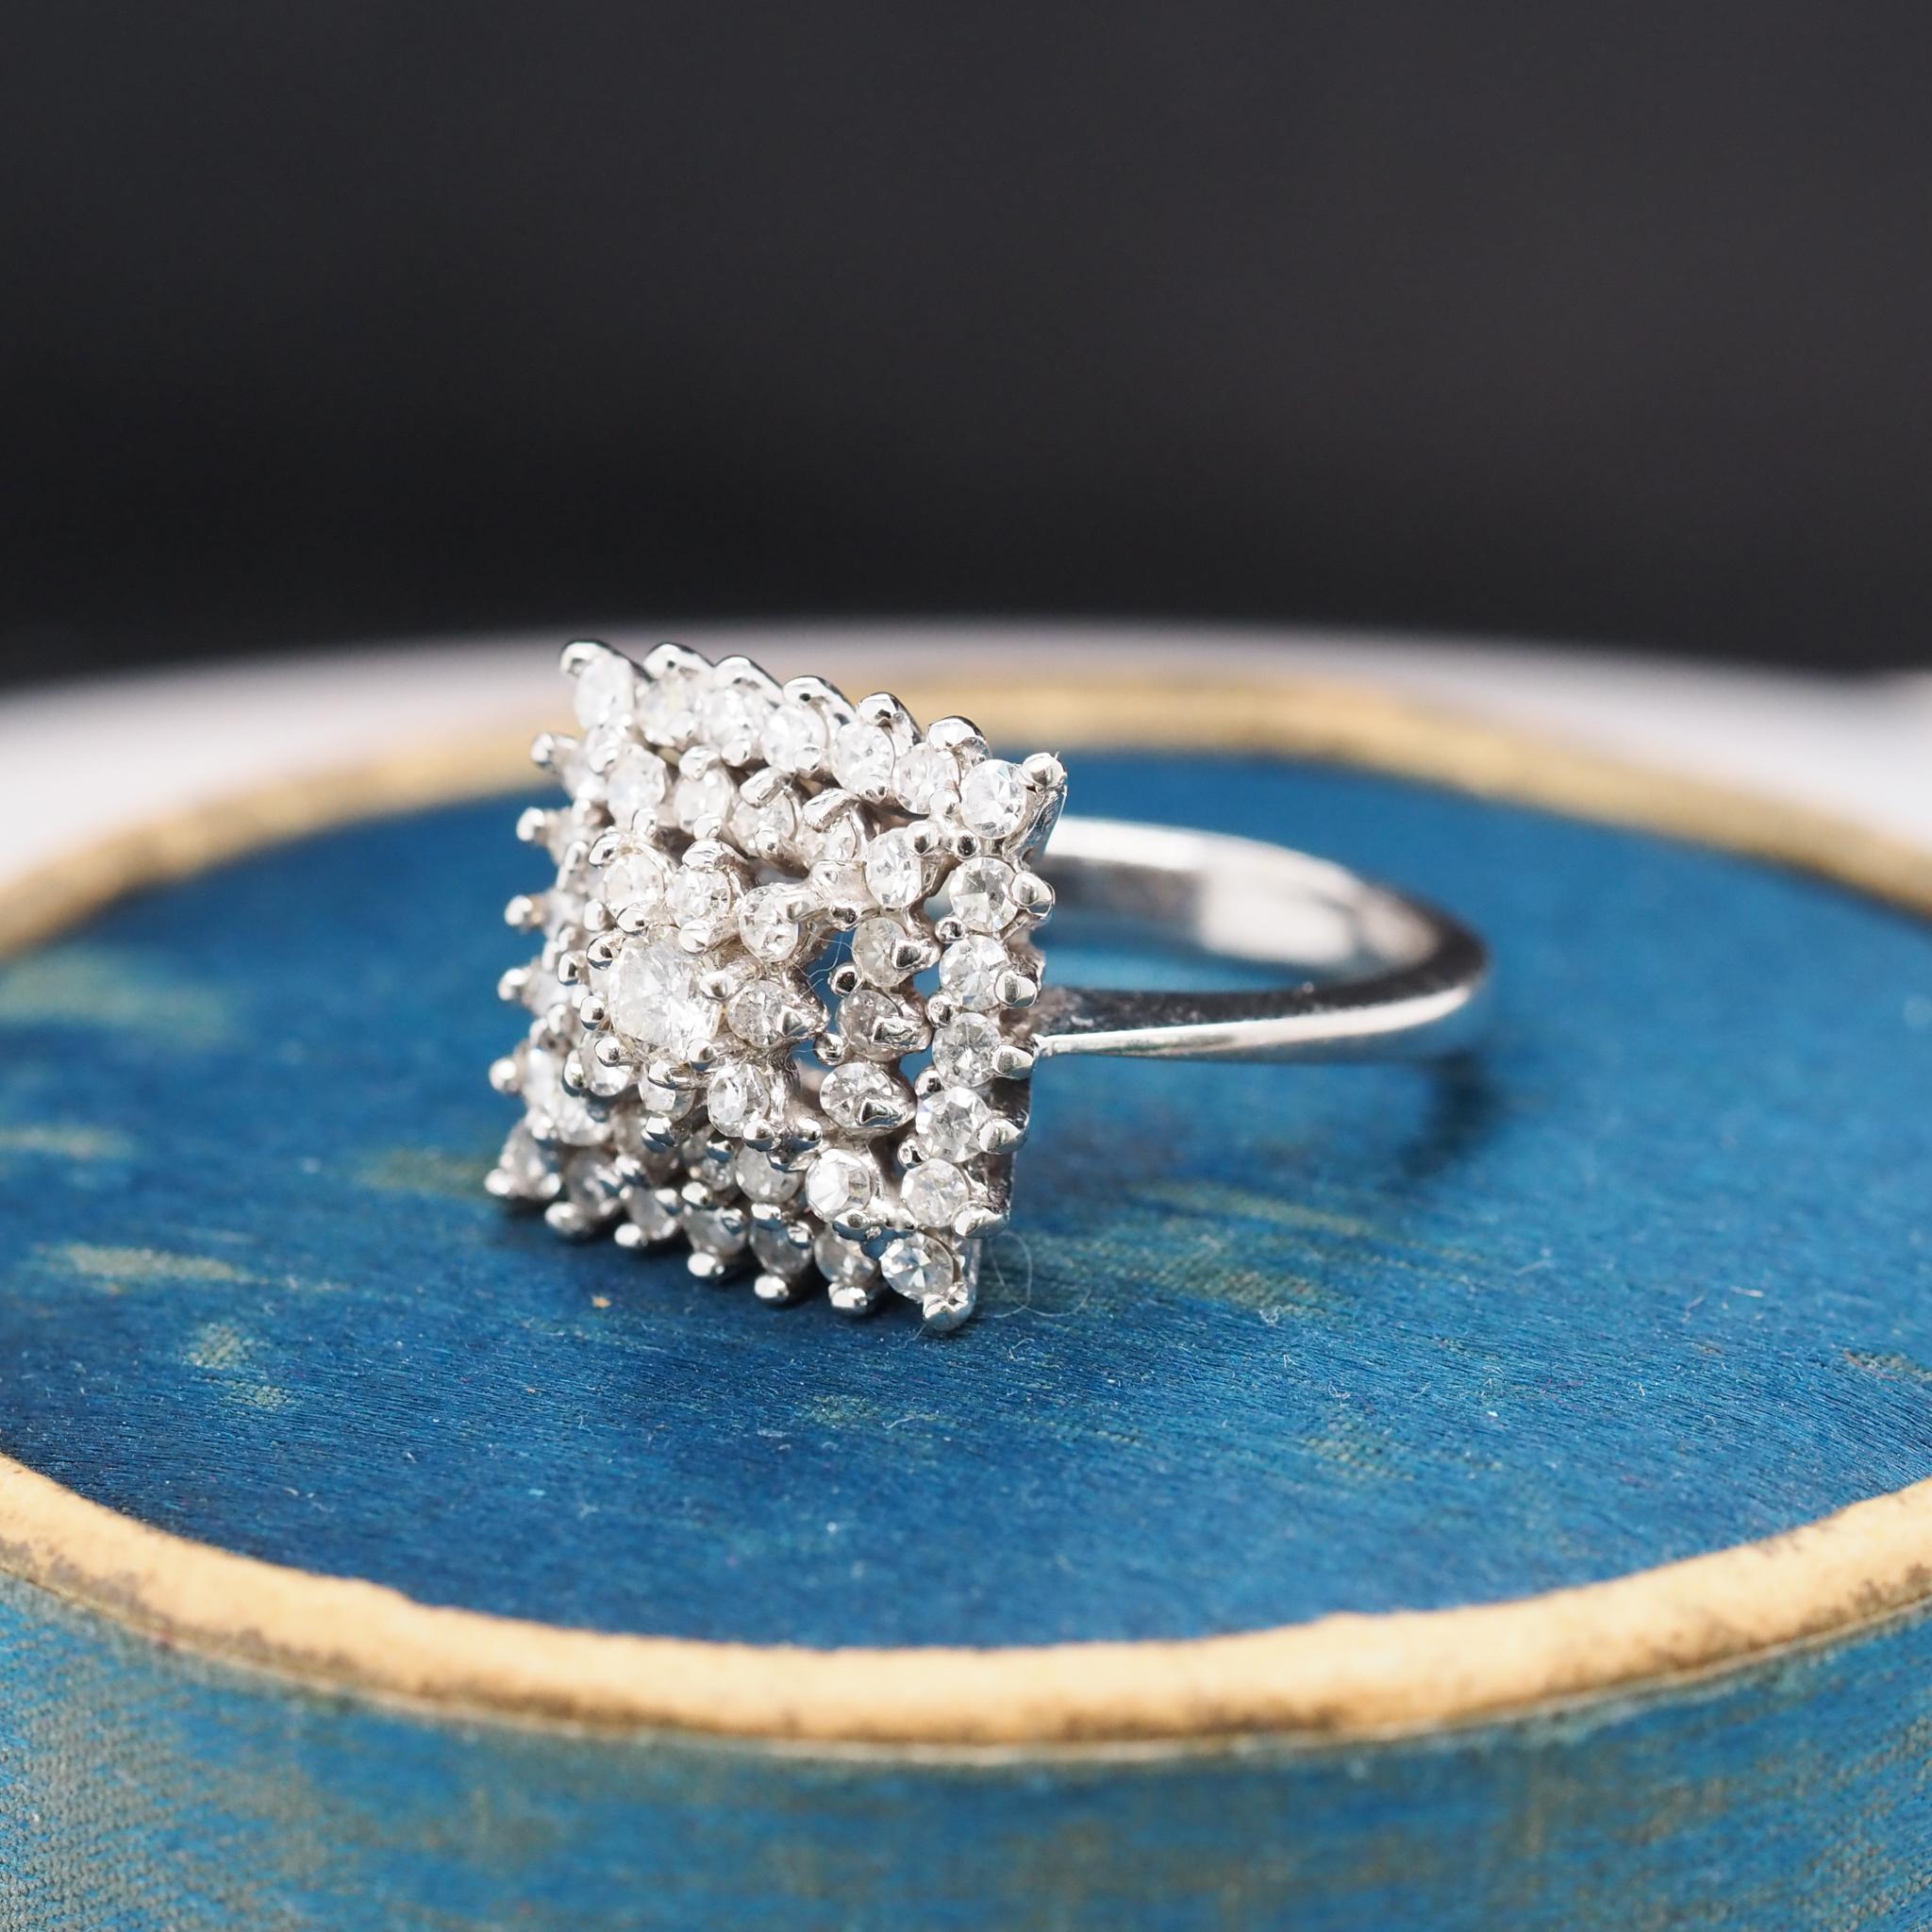 Ring Size: 6.5
Metal Type: 14k White Gold  [Hallmarked, and Tested]
Weight:  5.9 grams



Diamond Details:

Weight: .75ct, total weight

Cut: Round Brilliant

Clarity: SI-I

Color: I/J

Band Width: 2.5 mm
Condition:  Excellent